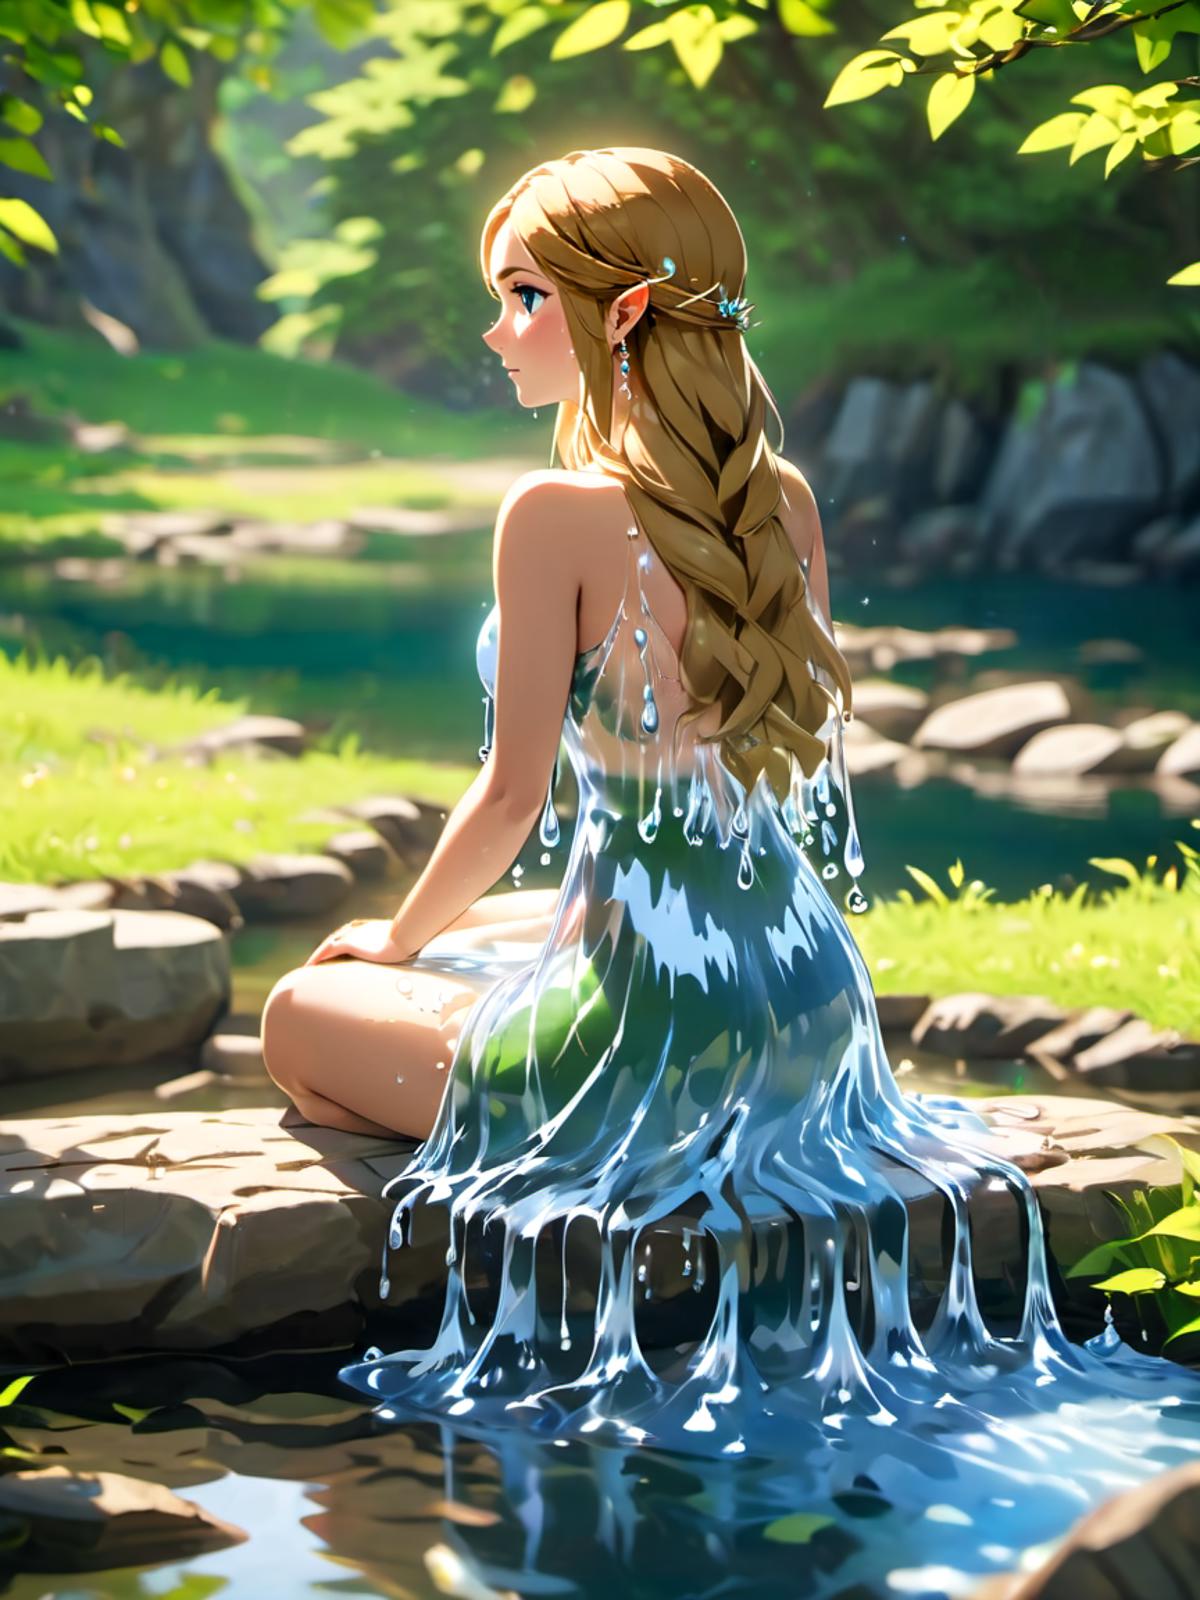 XL Water Dress image by n15g